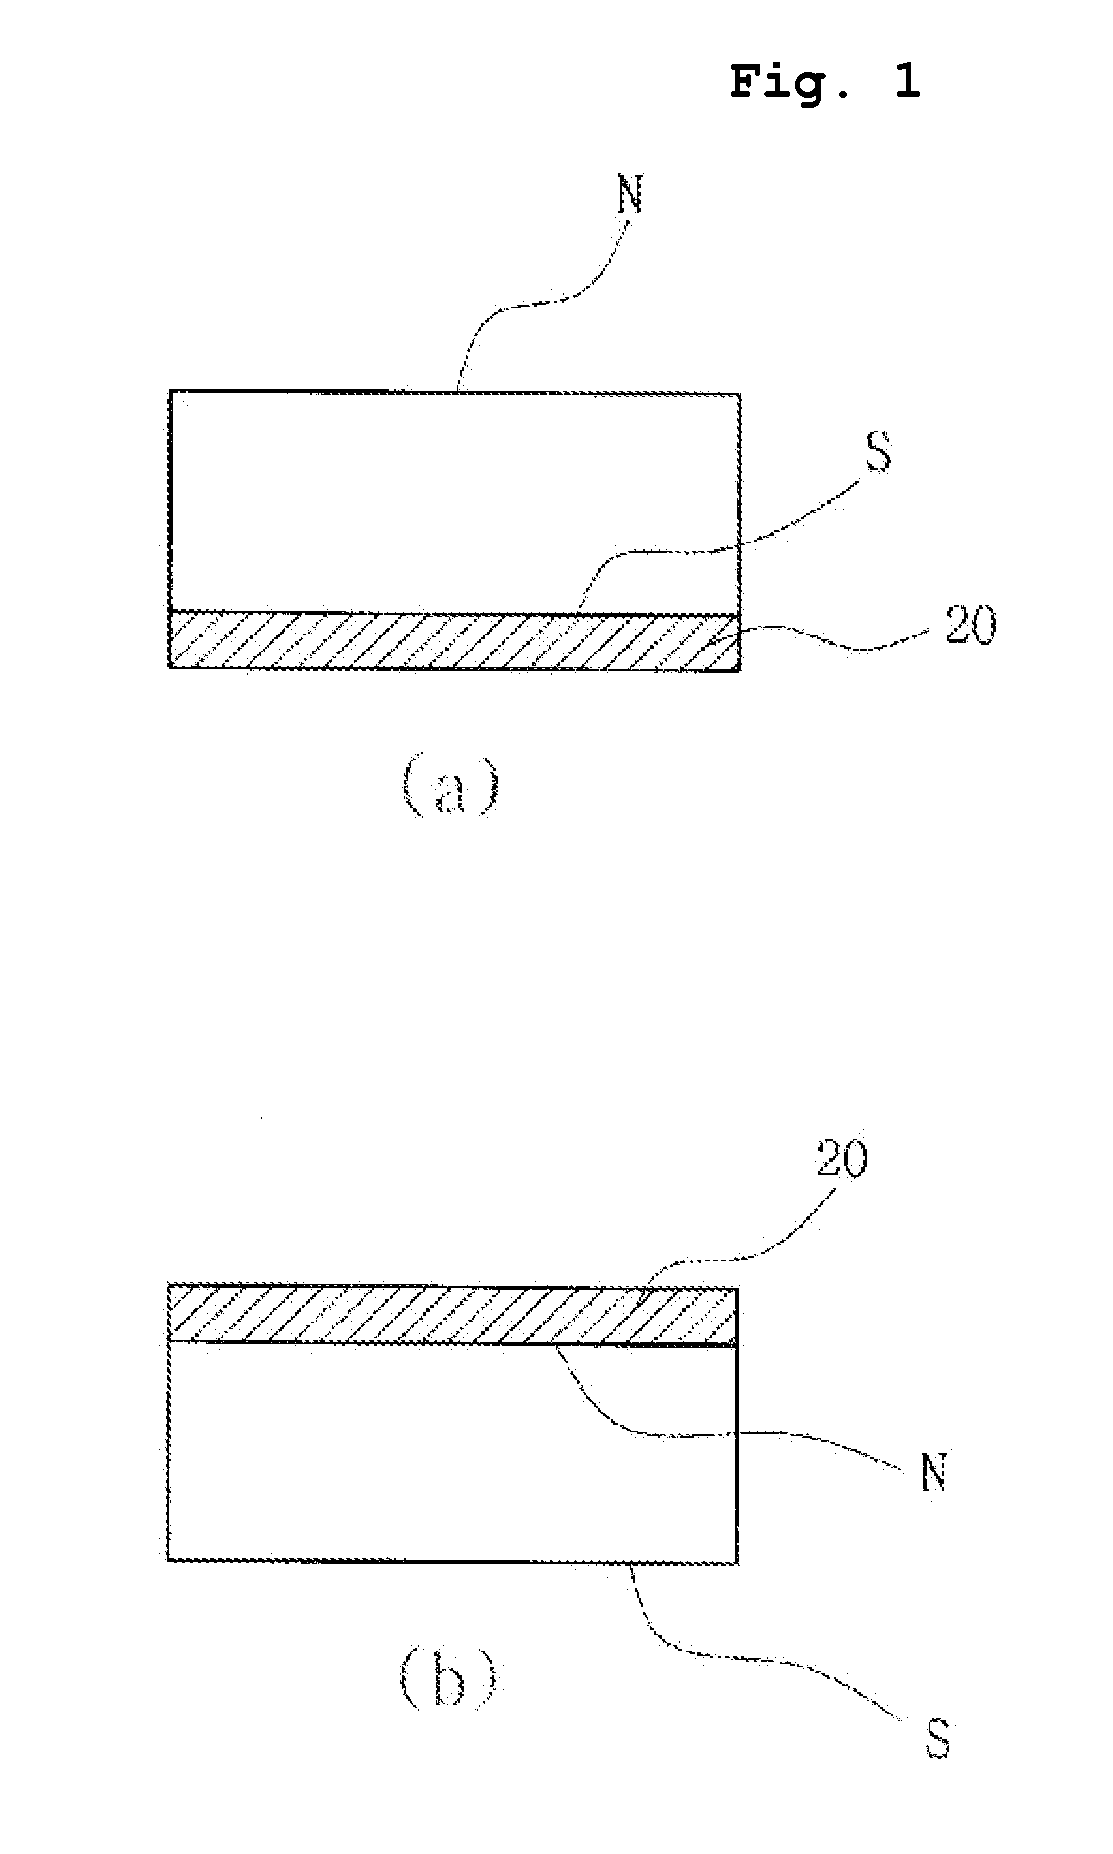 Magnetic reinforcing and reducing acupuncture method employing the ionization tendency of metals